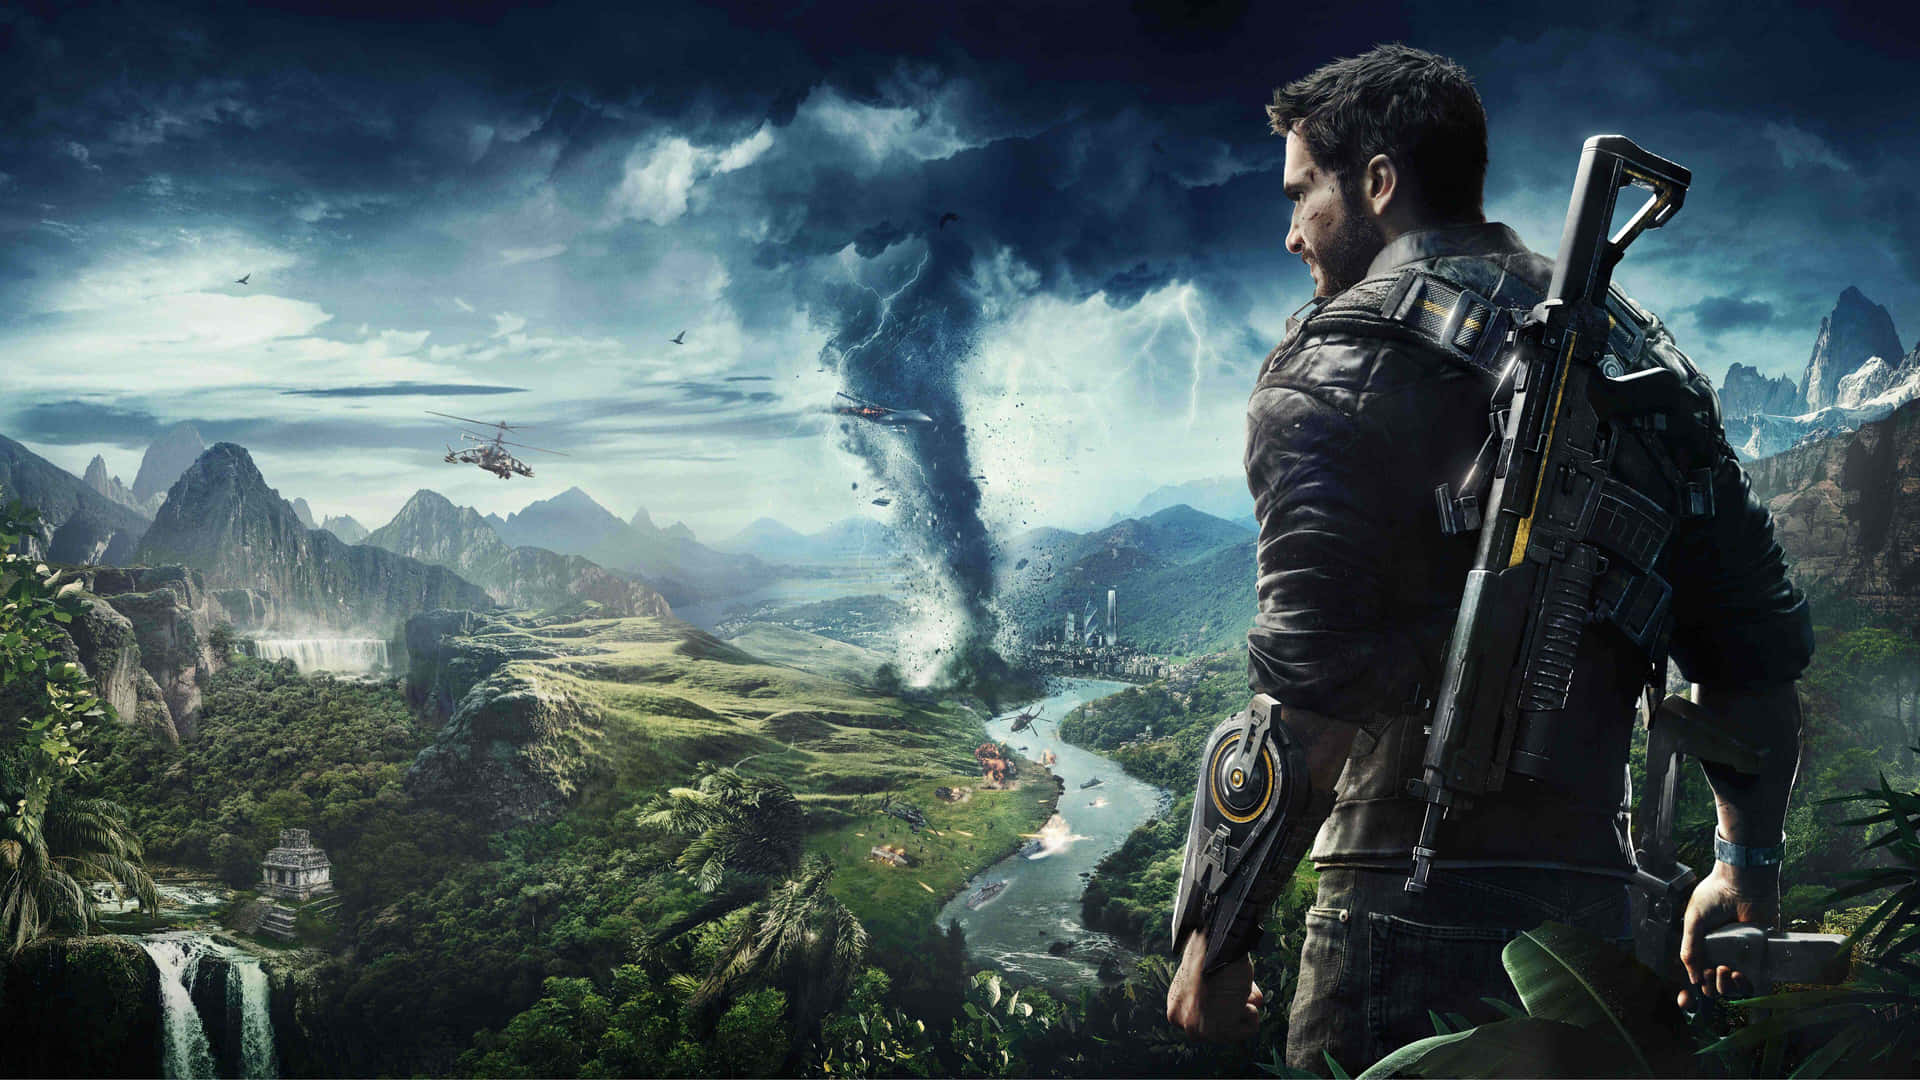 Experience the sheer adrenaline rush of Just Cause 4